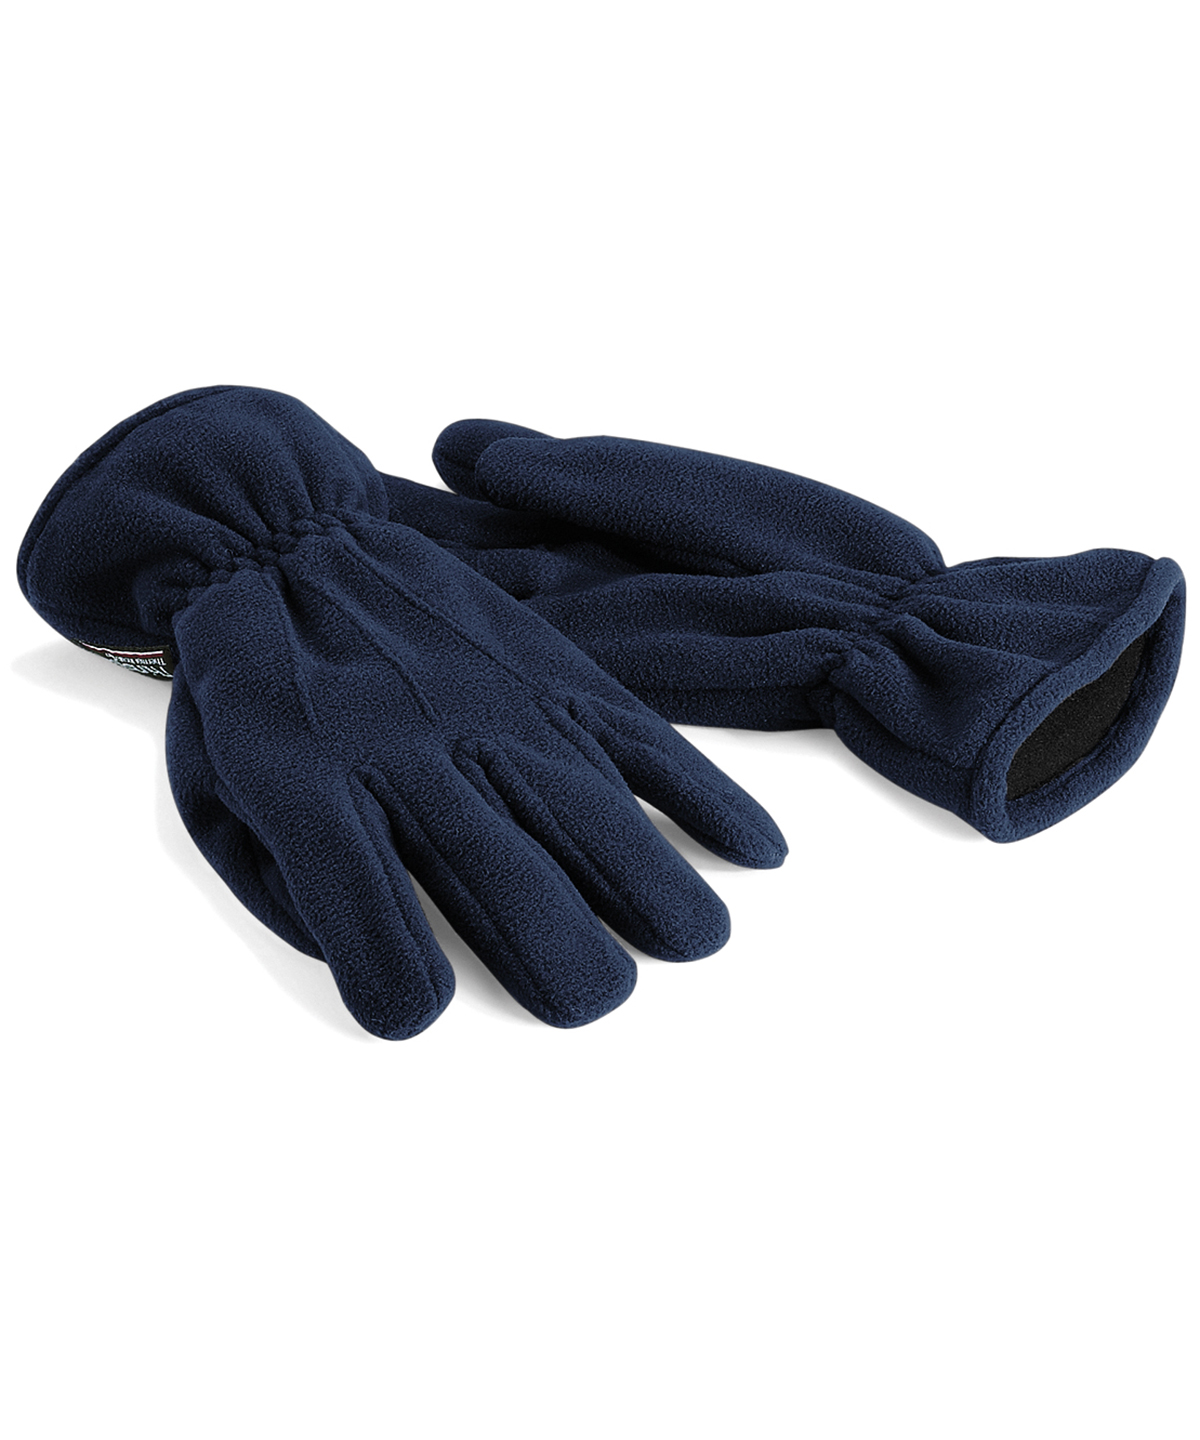 Suprafleece Thinsulate® Gloves French Navy Size Large/XL